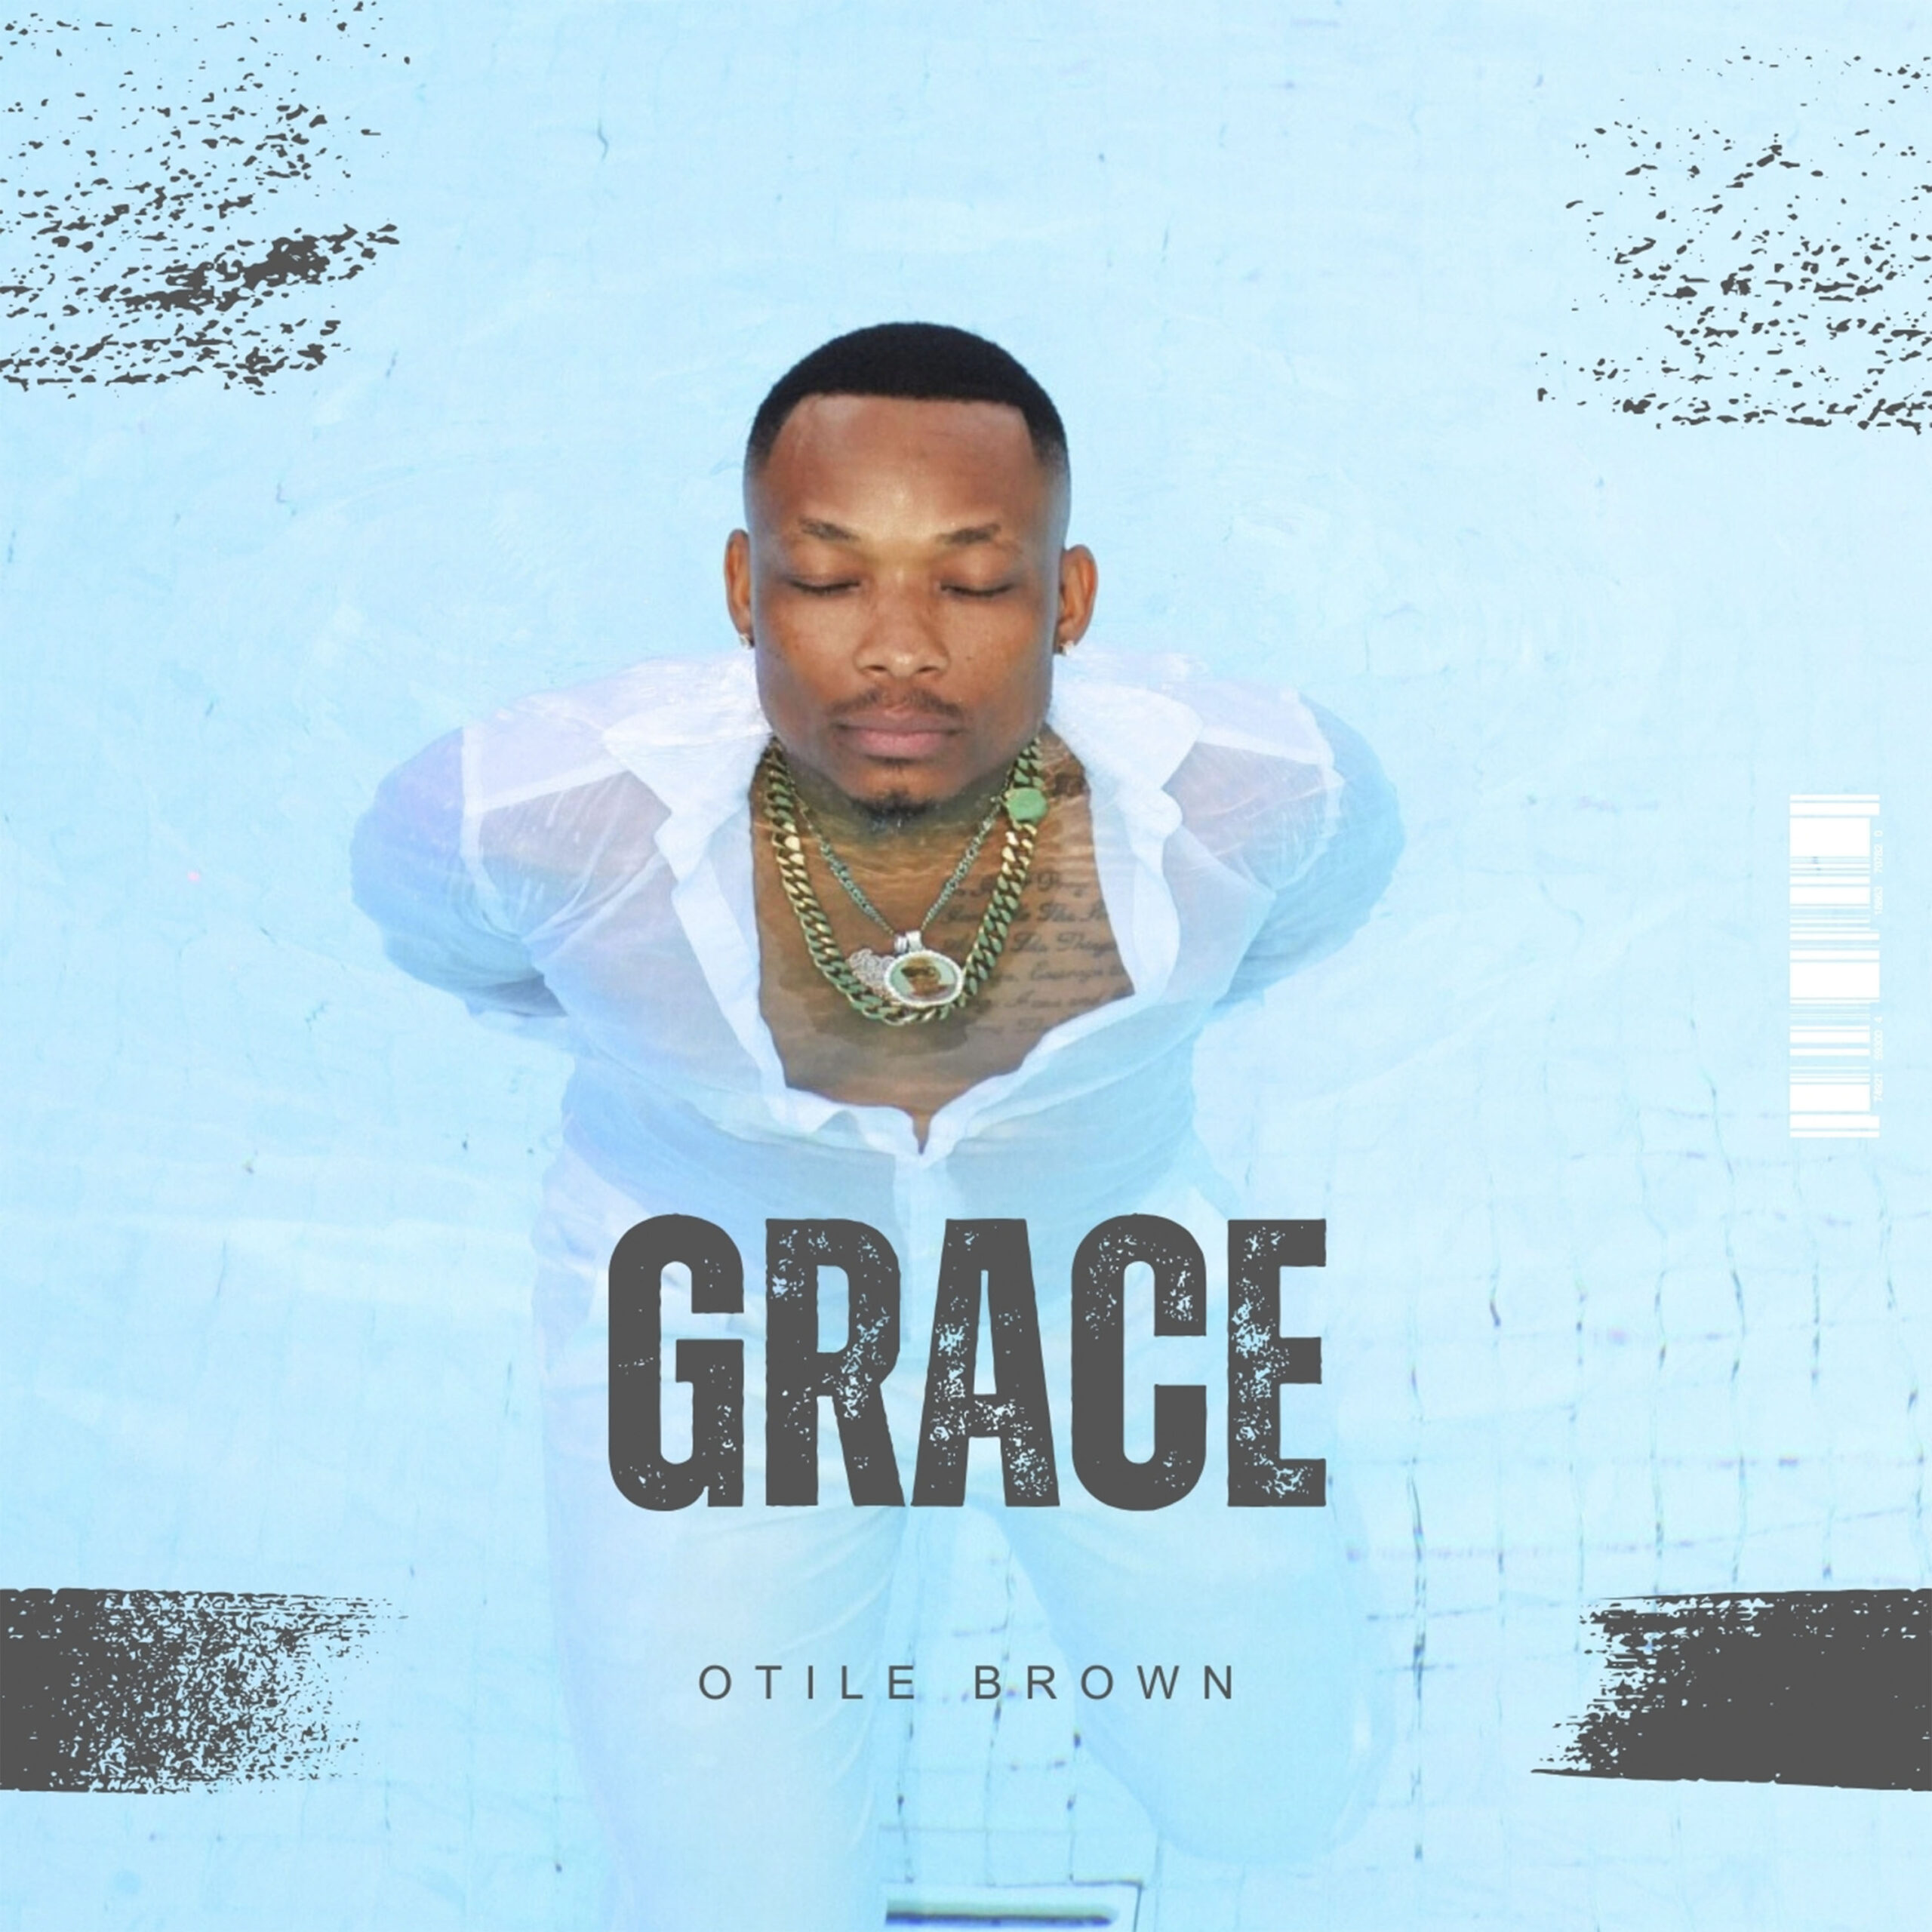 Download Audio Mp3 | Otile Brown Ft. Eddy Kenzo - African Woman